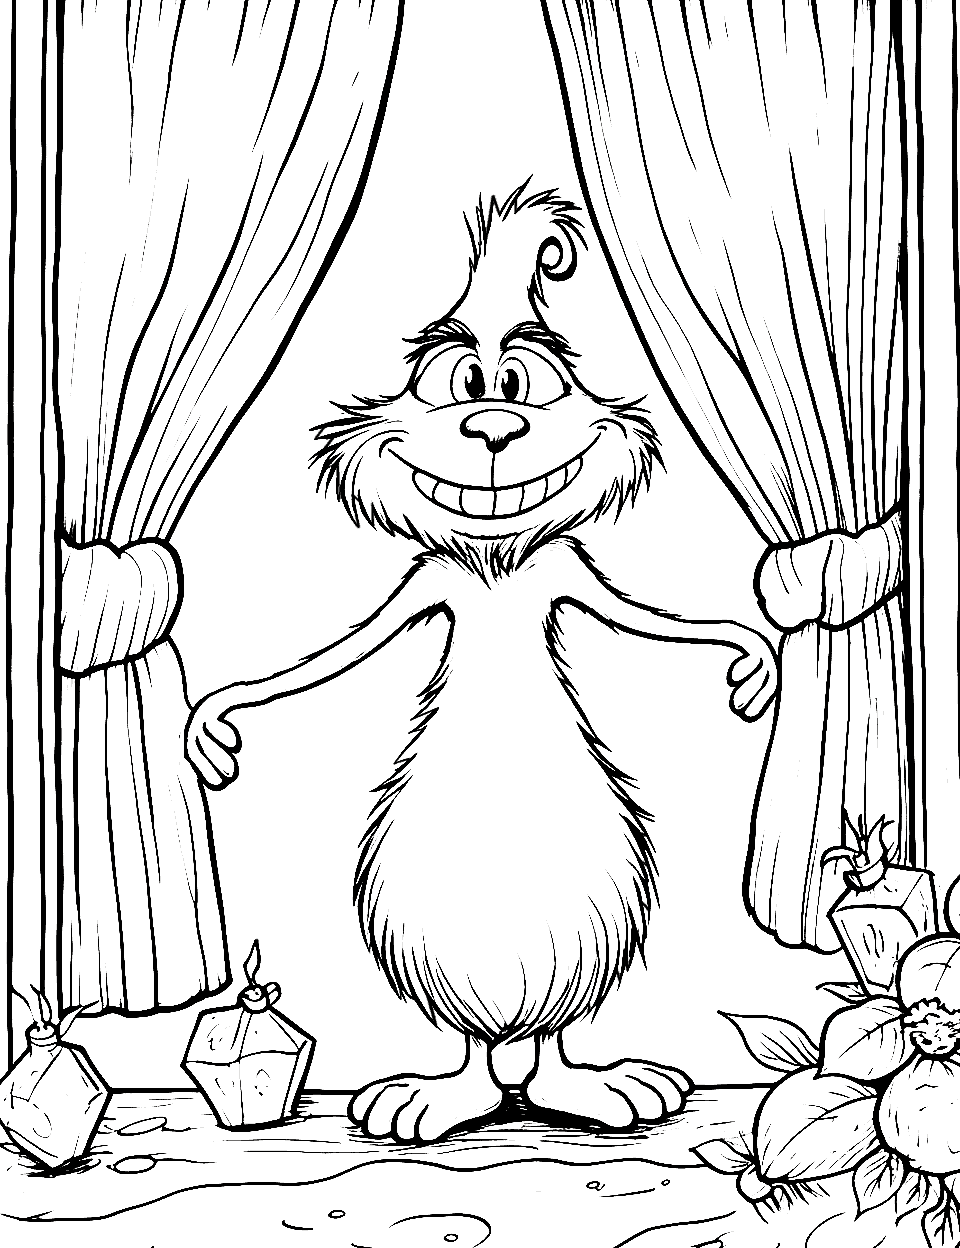 Winter Window Peek Coloring Page - The Grinch in front of a frosty window on Christmas day.